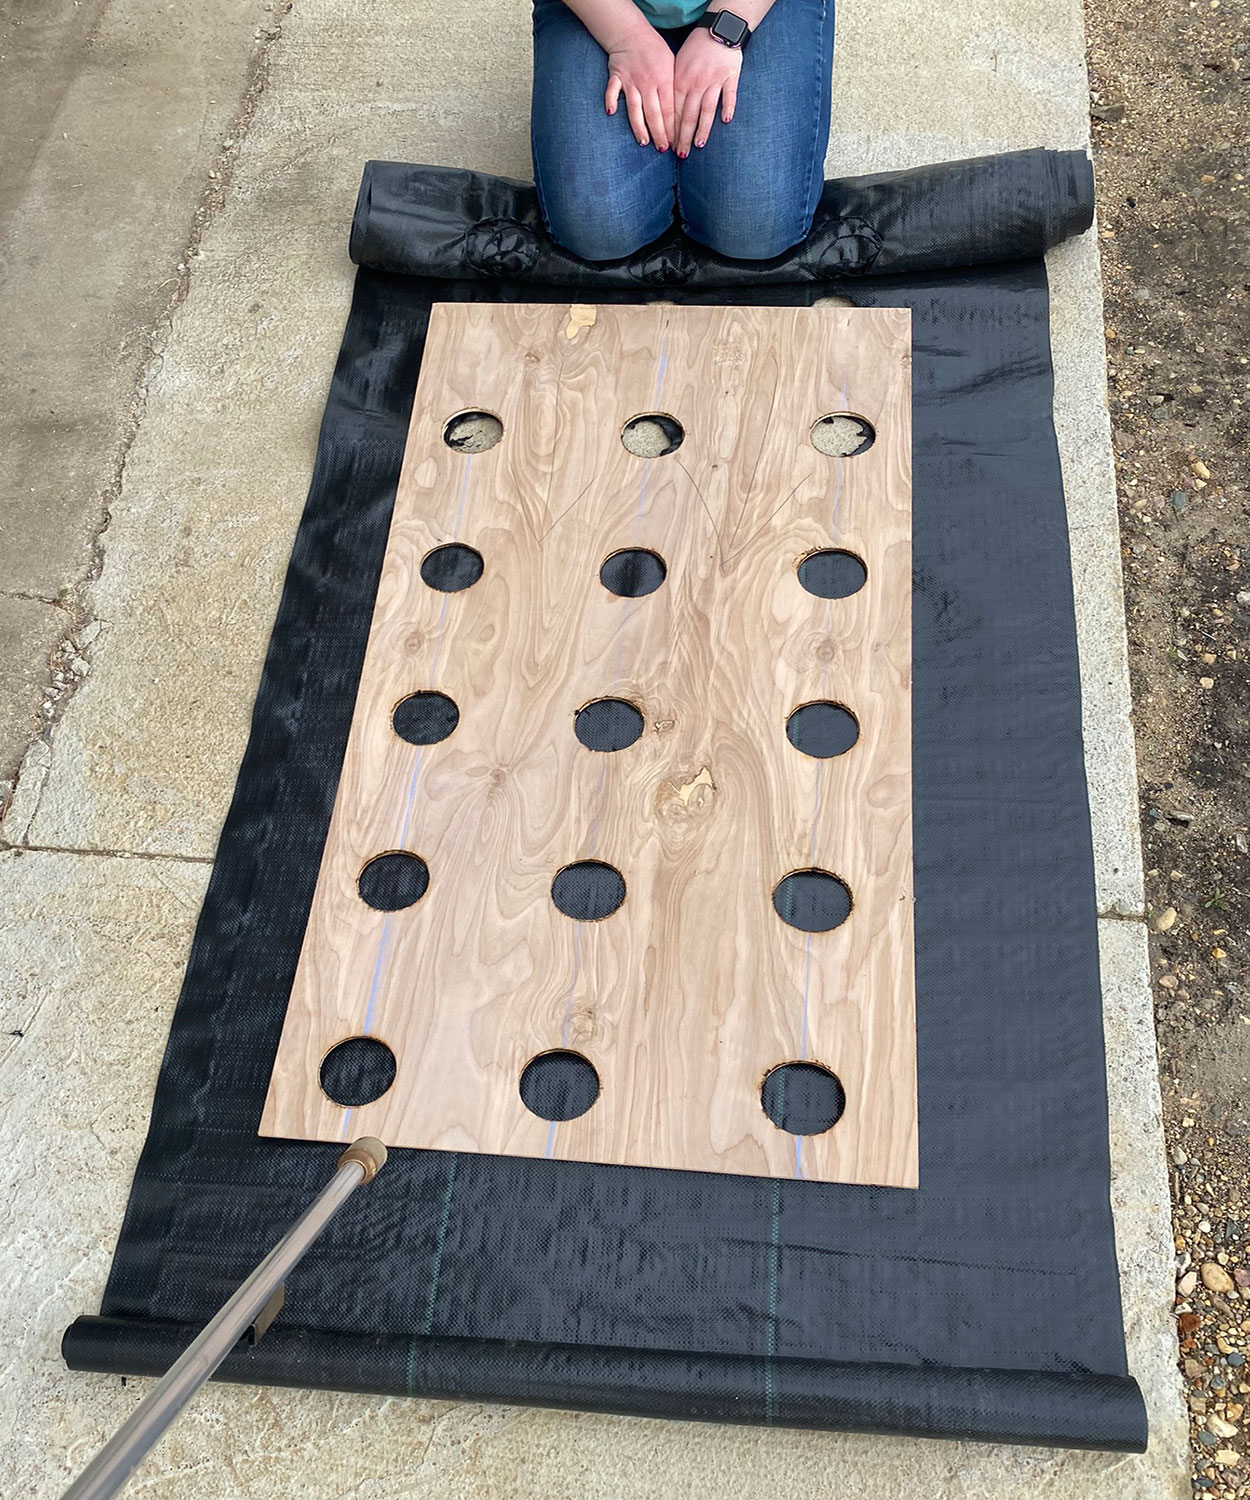 Landscape fabric with a wooden, 9 by 9-inch grid template placed on top of it.